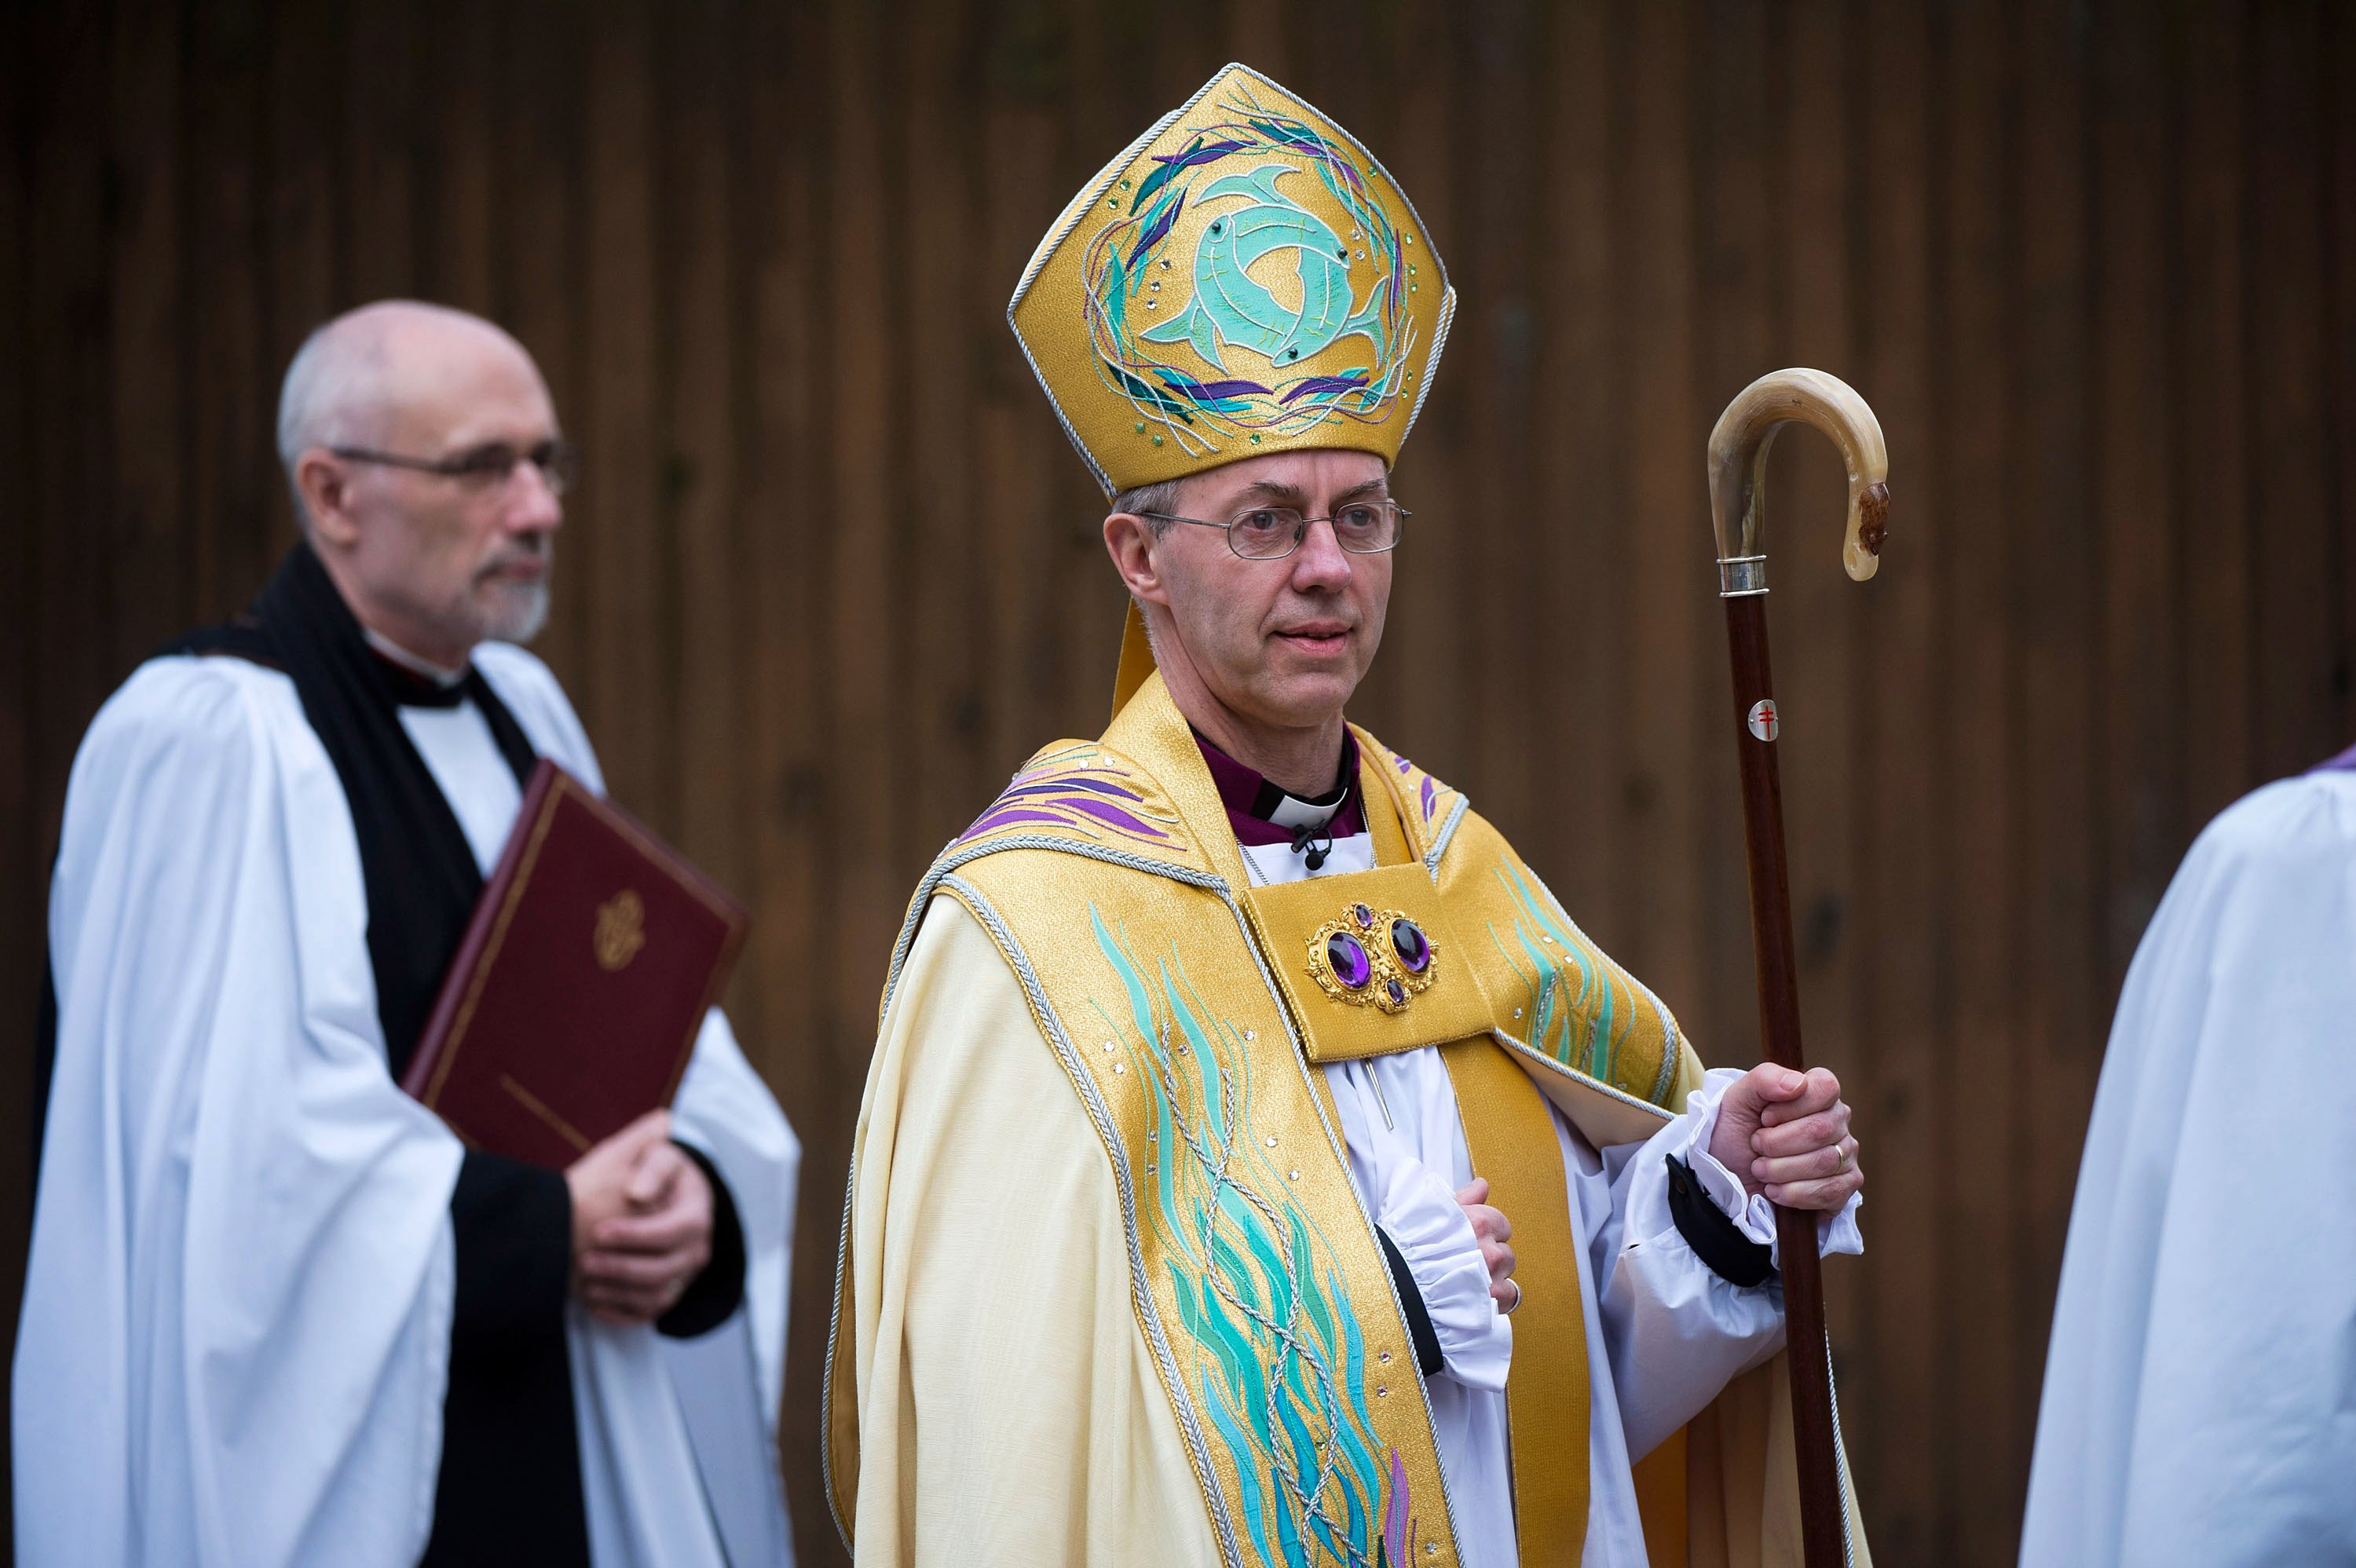 Justin Welby arriving for his enthronement as Archbishop of Canterbury in 2013